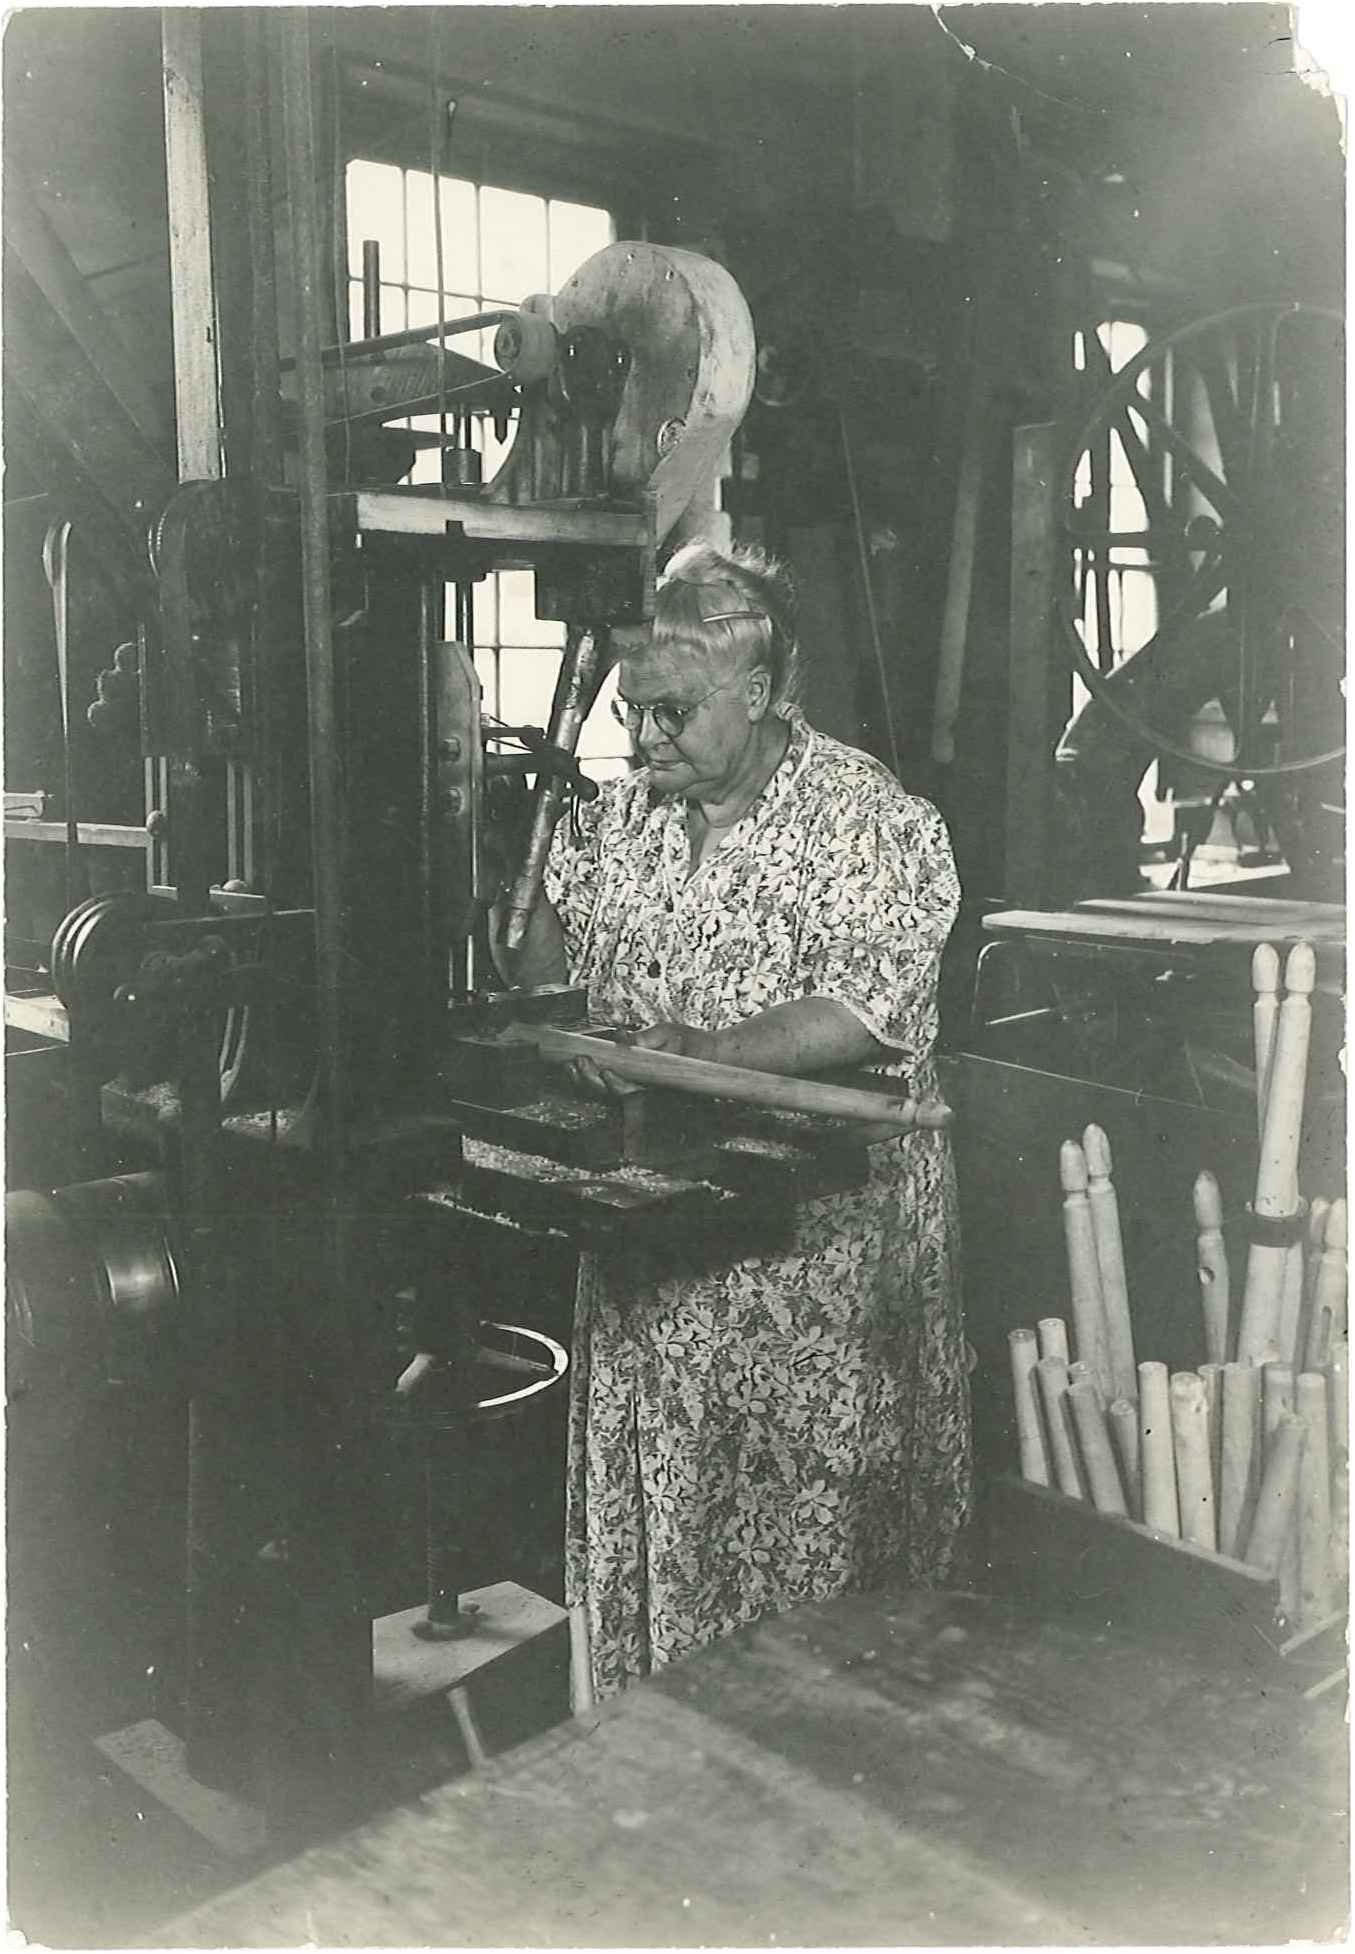 An old photo of a woman working in a factory.